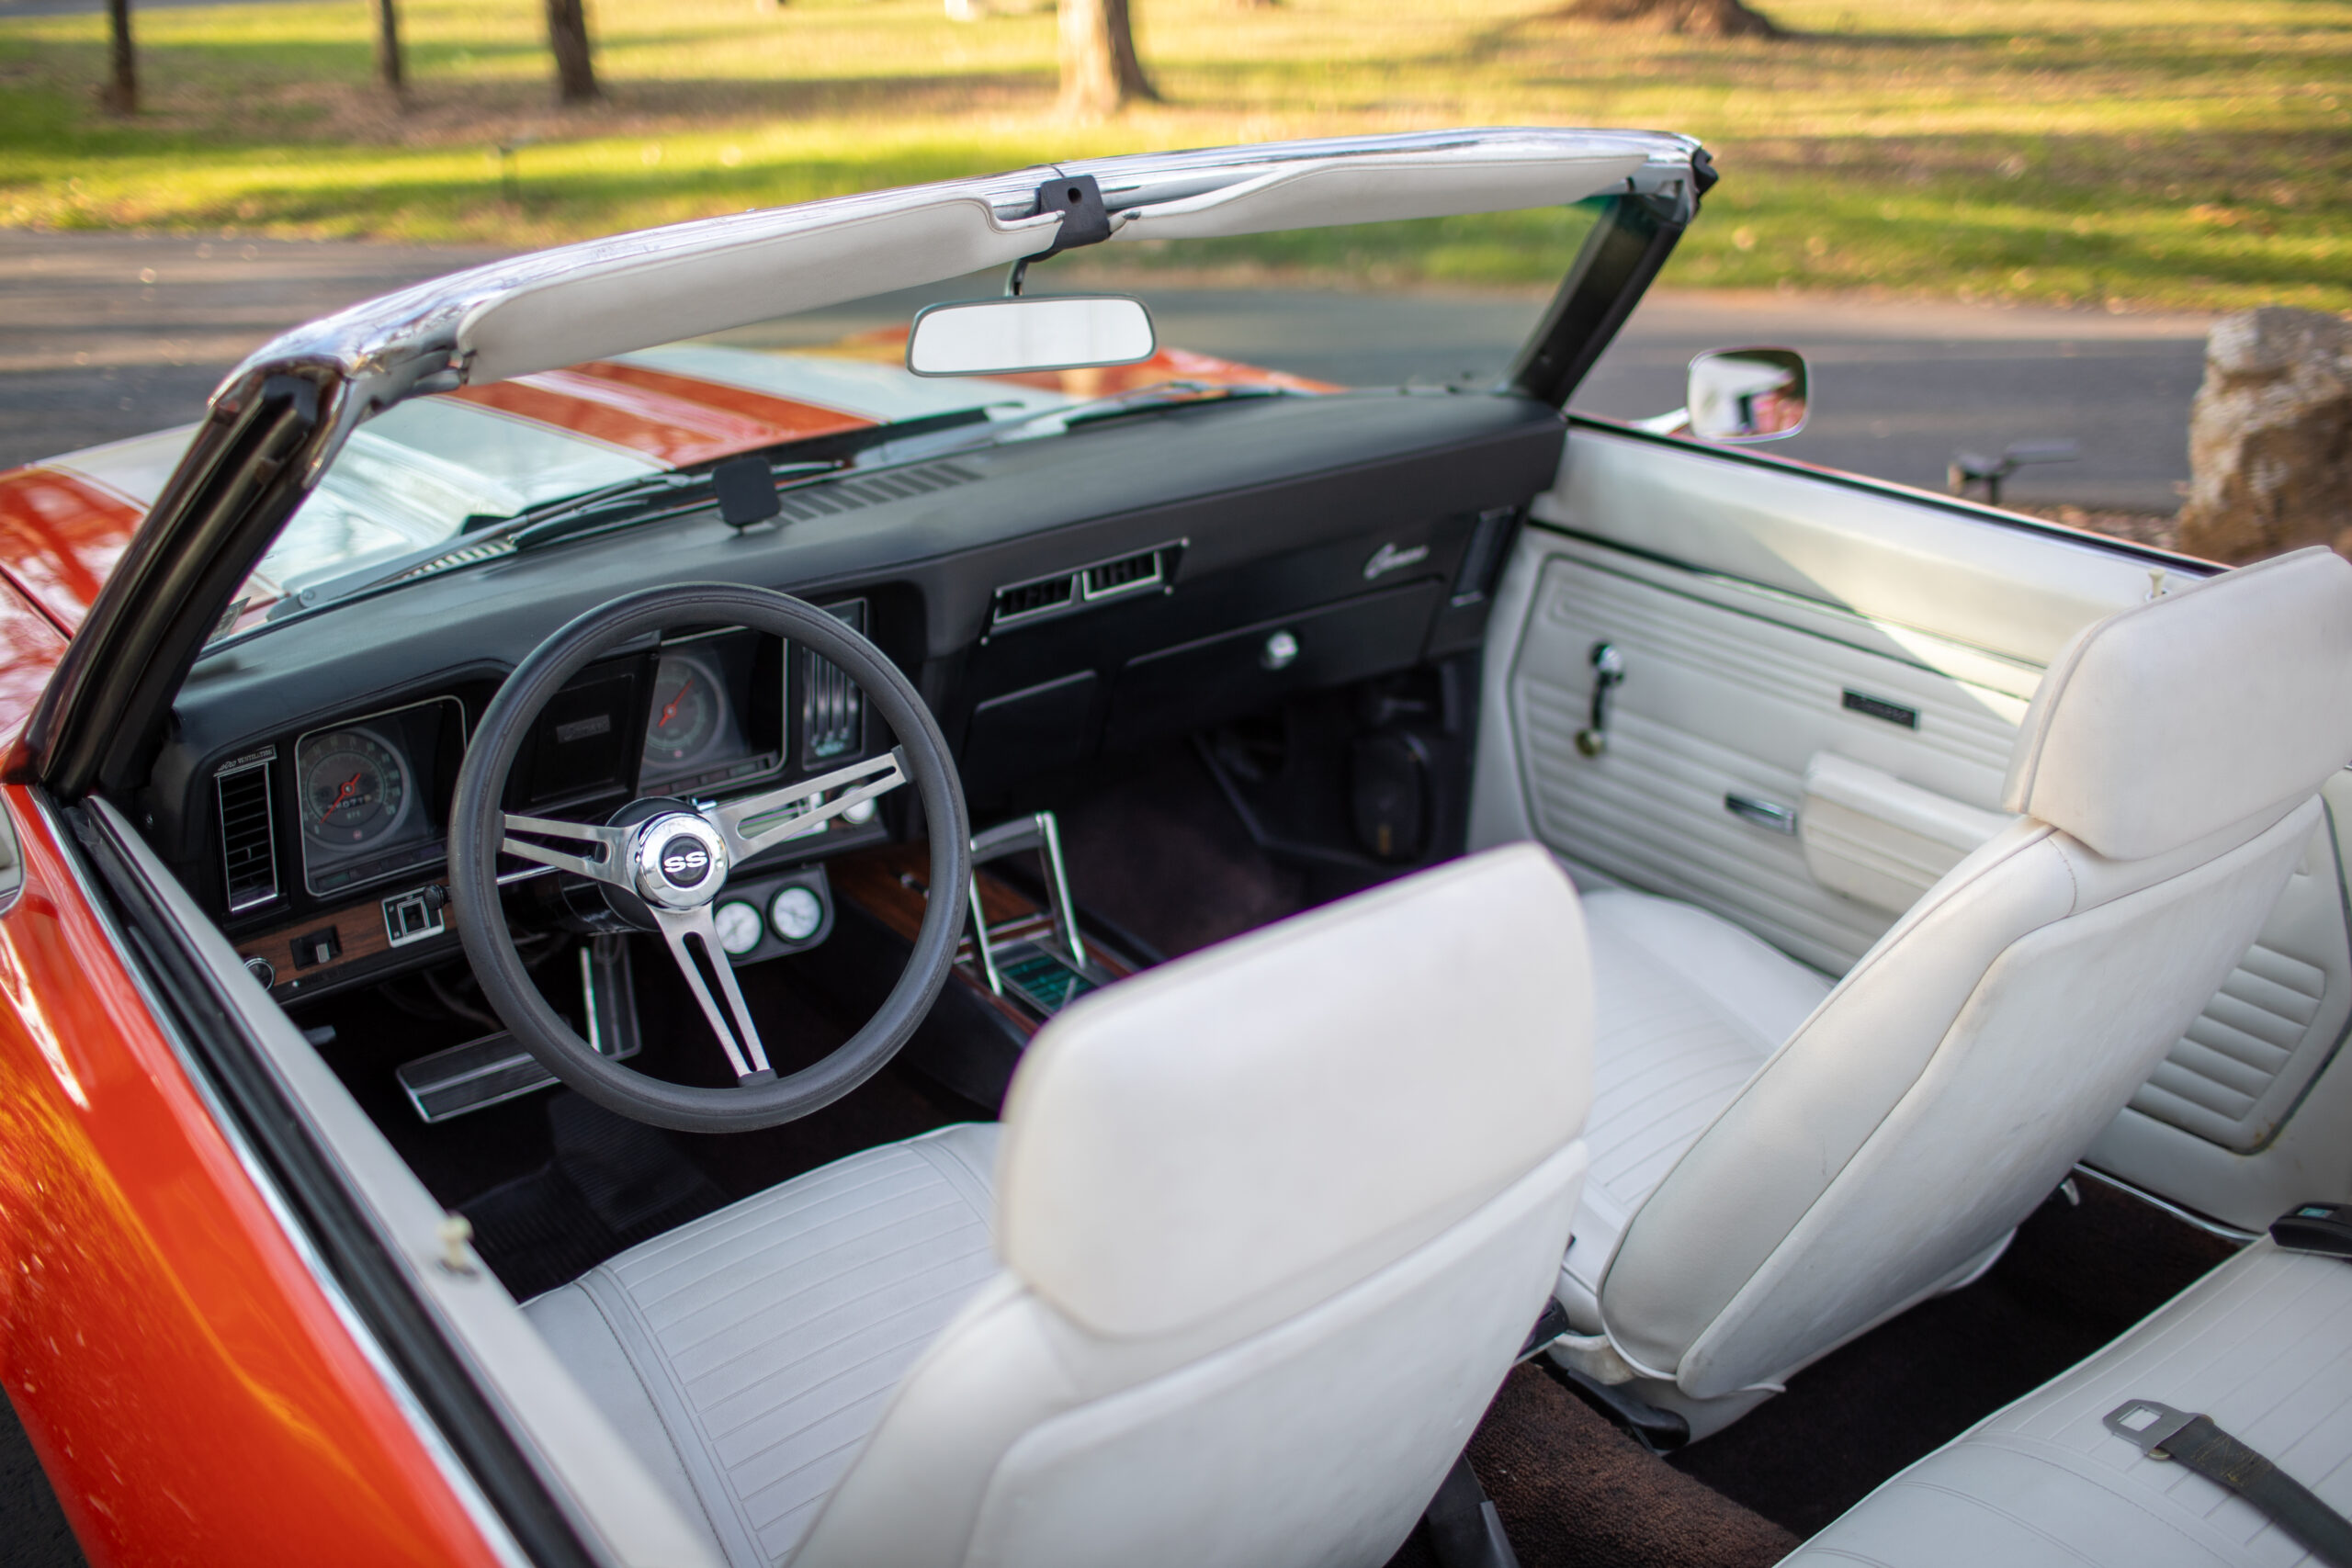 Interior view of a vintage convertible car with an orange exterior, white seats, and a classic steering wheel.